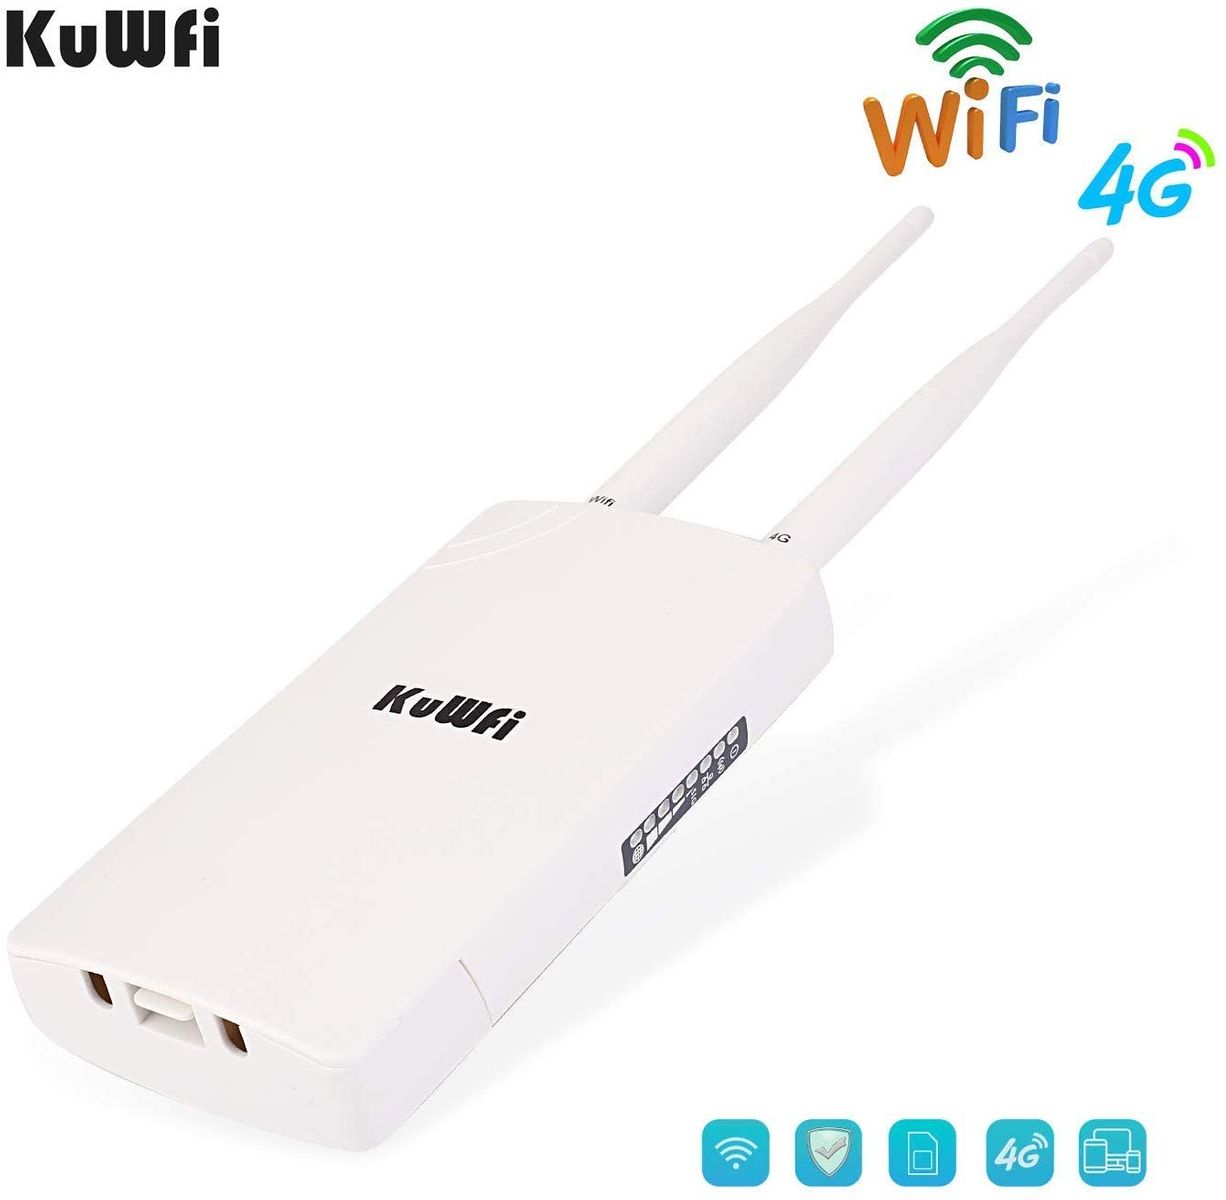 KuWFi LTE WLAN Router, 150Mbps CAT4 4G LTE Router with SIM Card Slot Working with IP Camera or WLAN